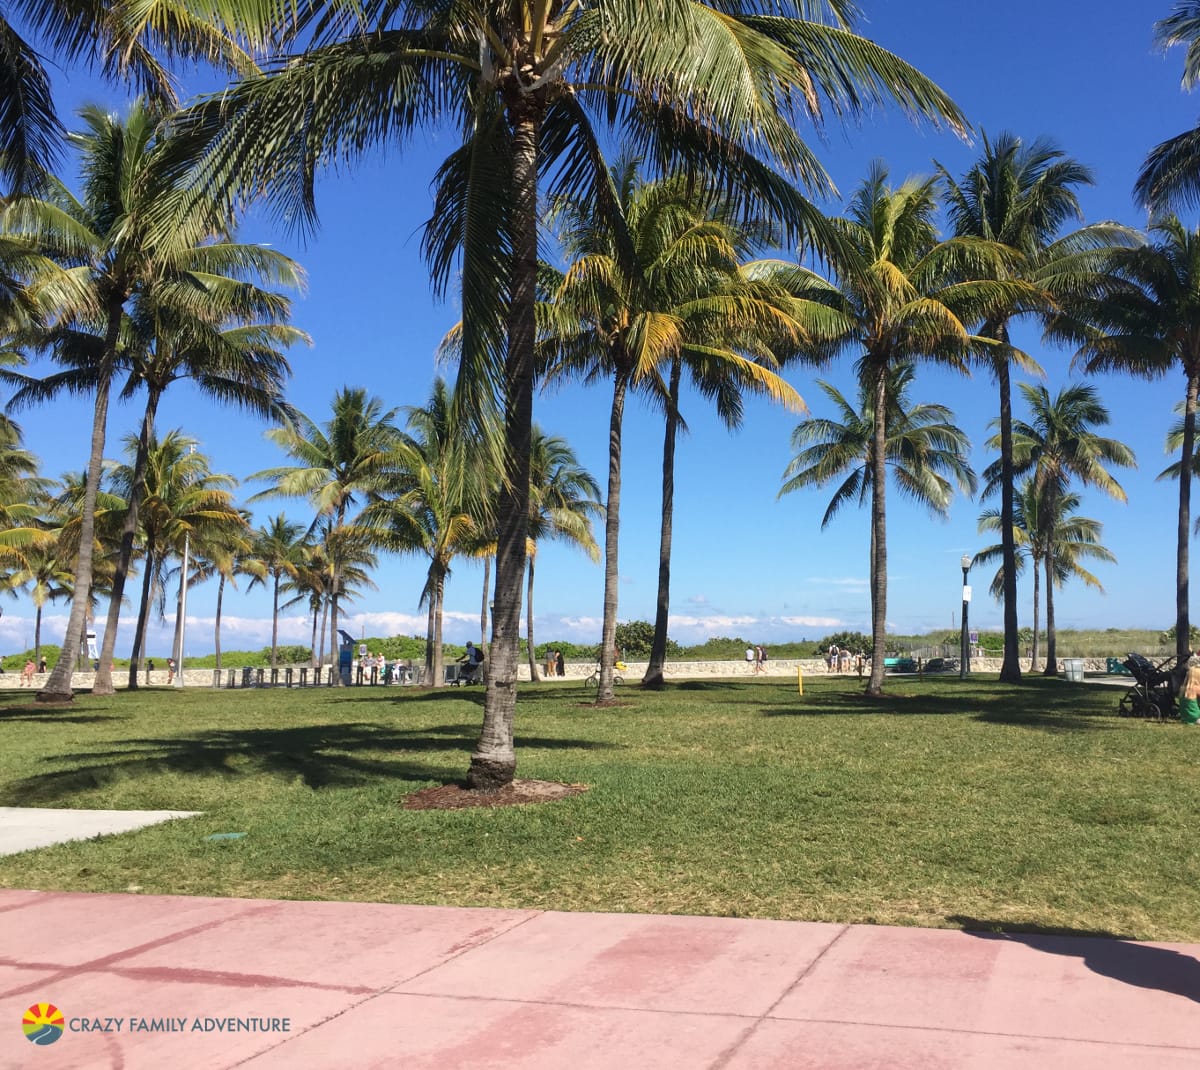 South Beach Miami - Things To Do In Miami With Kids